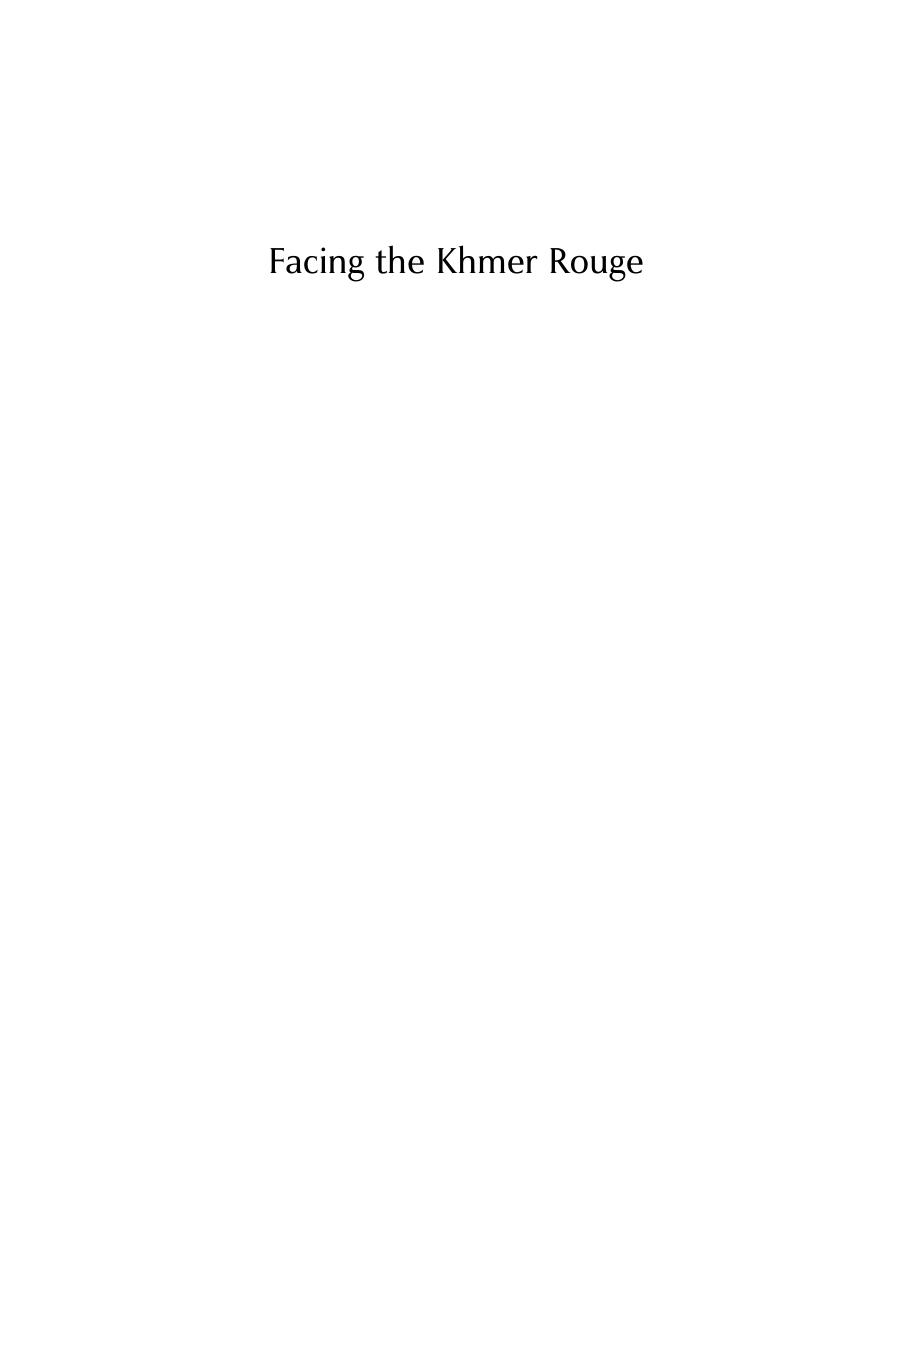 Facing the Khmer Rouge: A Cambodian Journey by Mr. Ronnie Yimsut